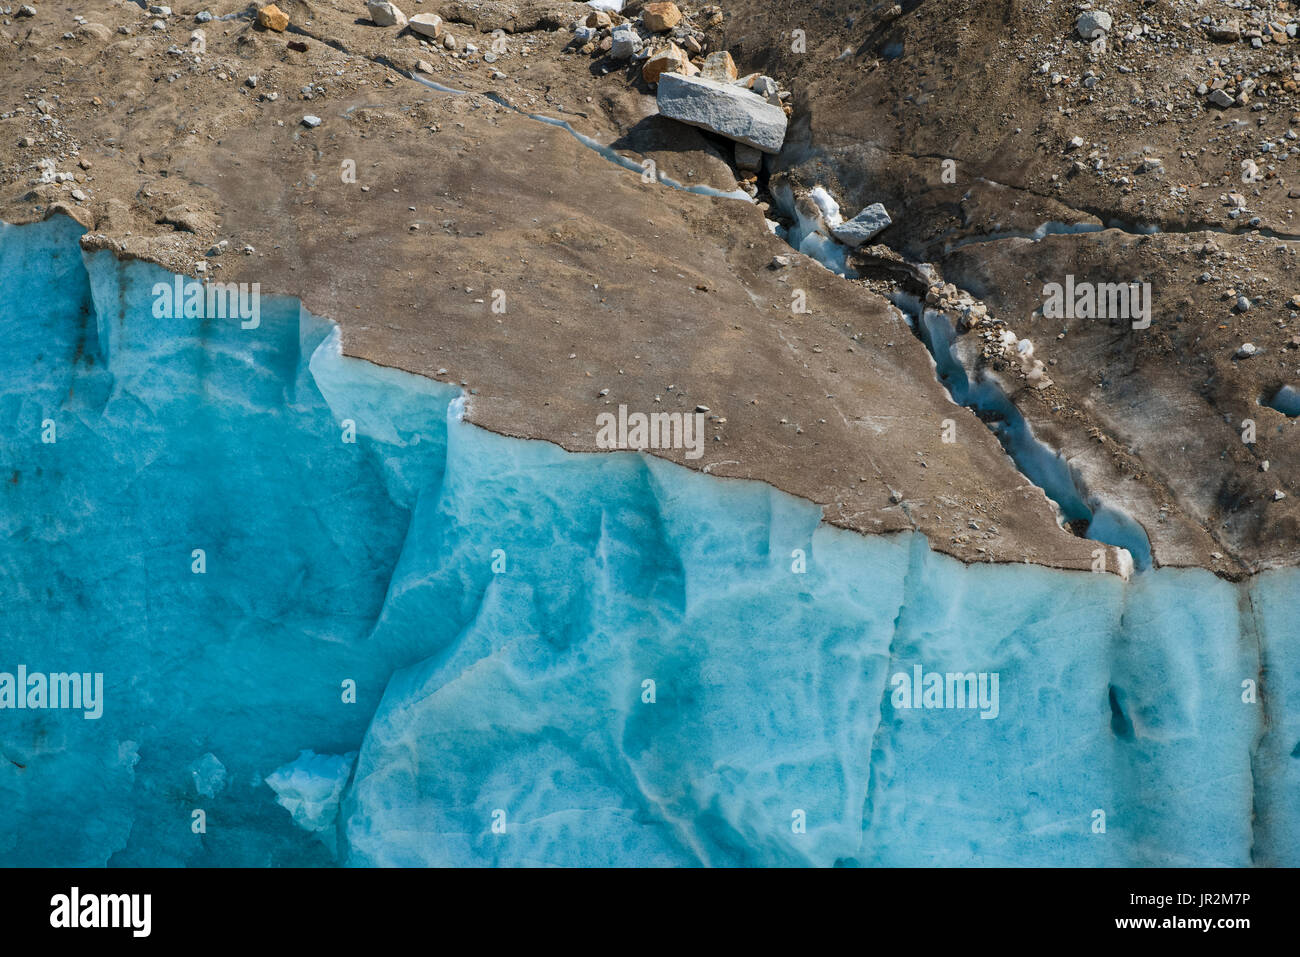 Aerial View Of Blue Ice Covered By Soil, Ruth Glacier, Denali National Park, Interior Alaska, USA Stock Photo